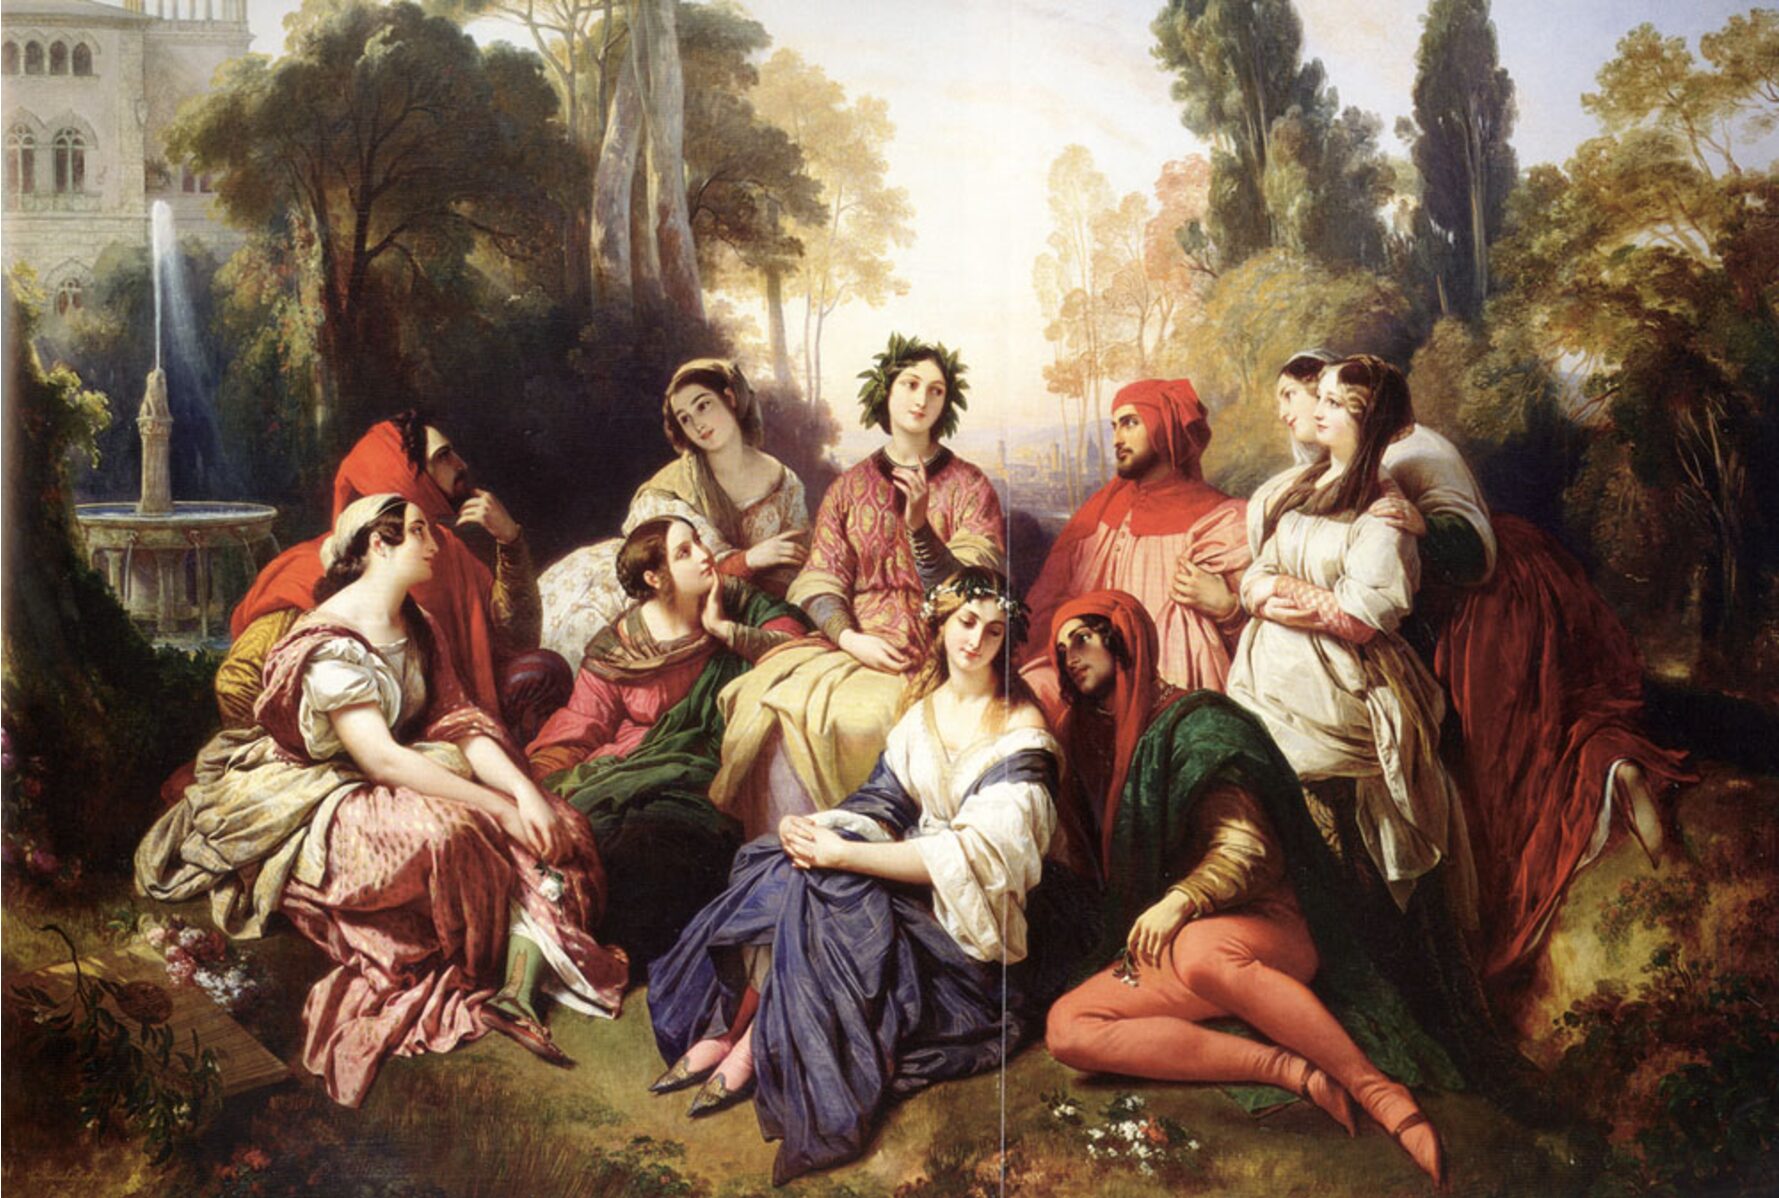 Representation of Women in the Decameron (their roles in the stories)